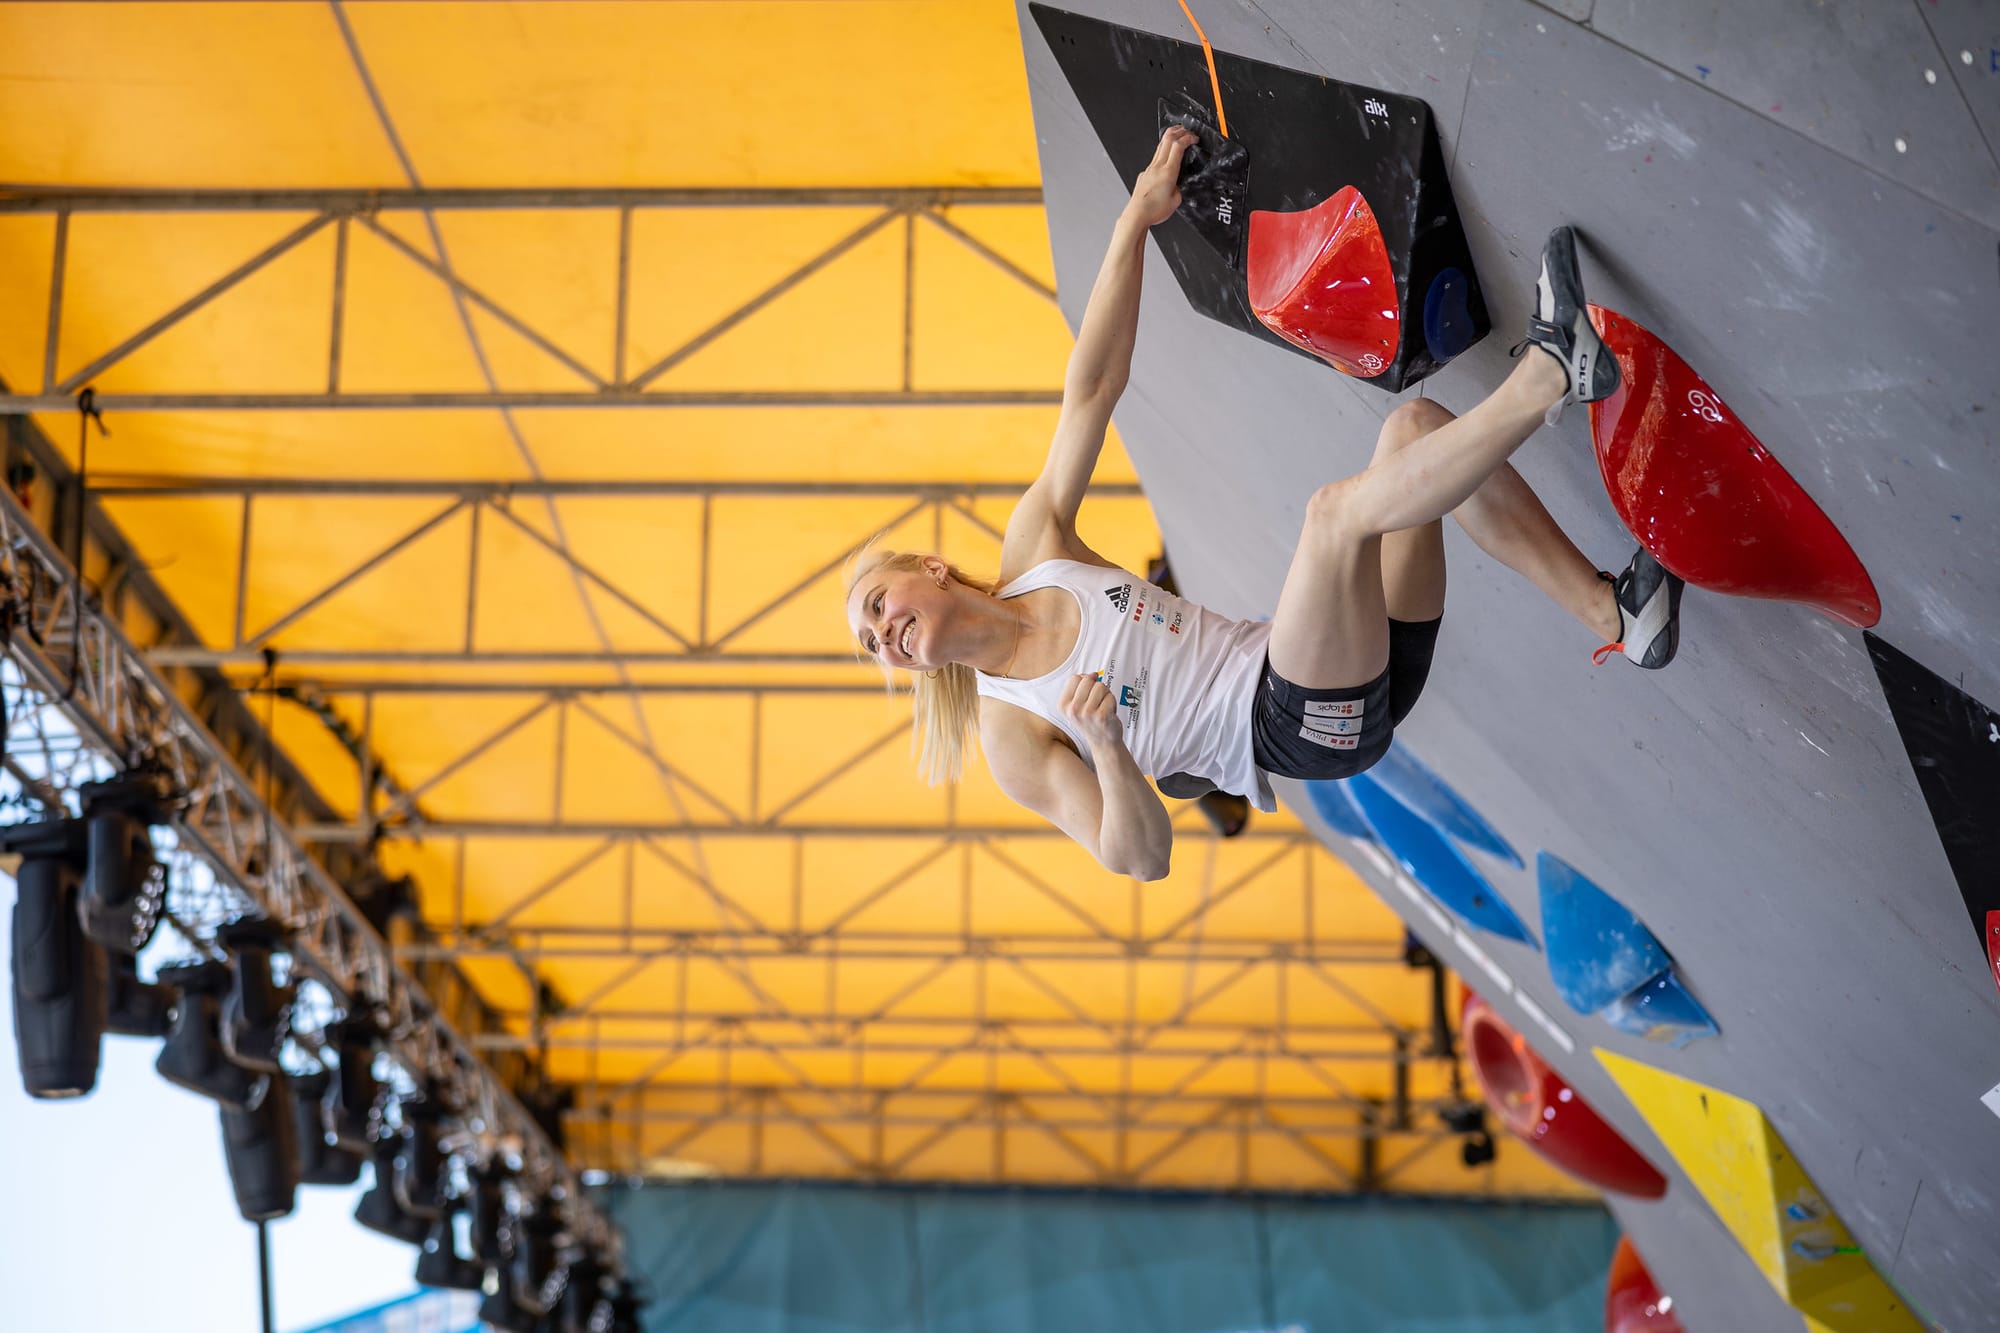 Janja Garnbret topping out the powerful W4 in the semi-finals.